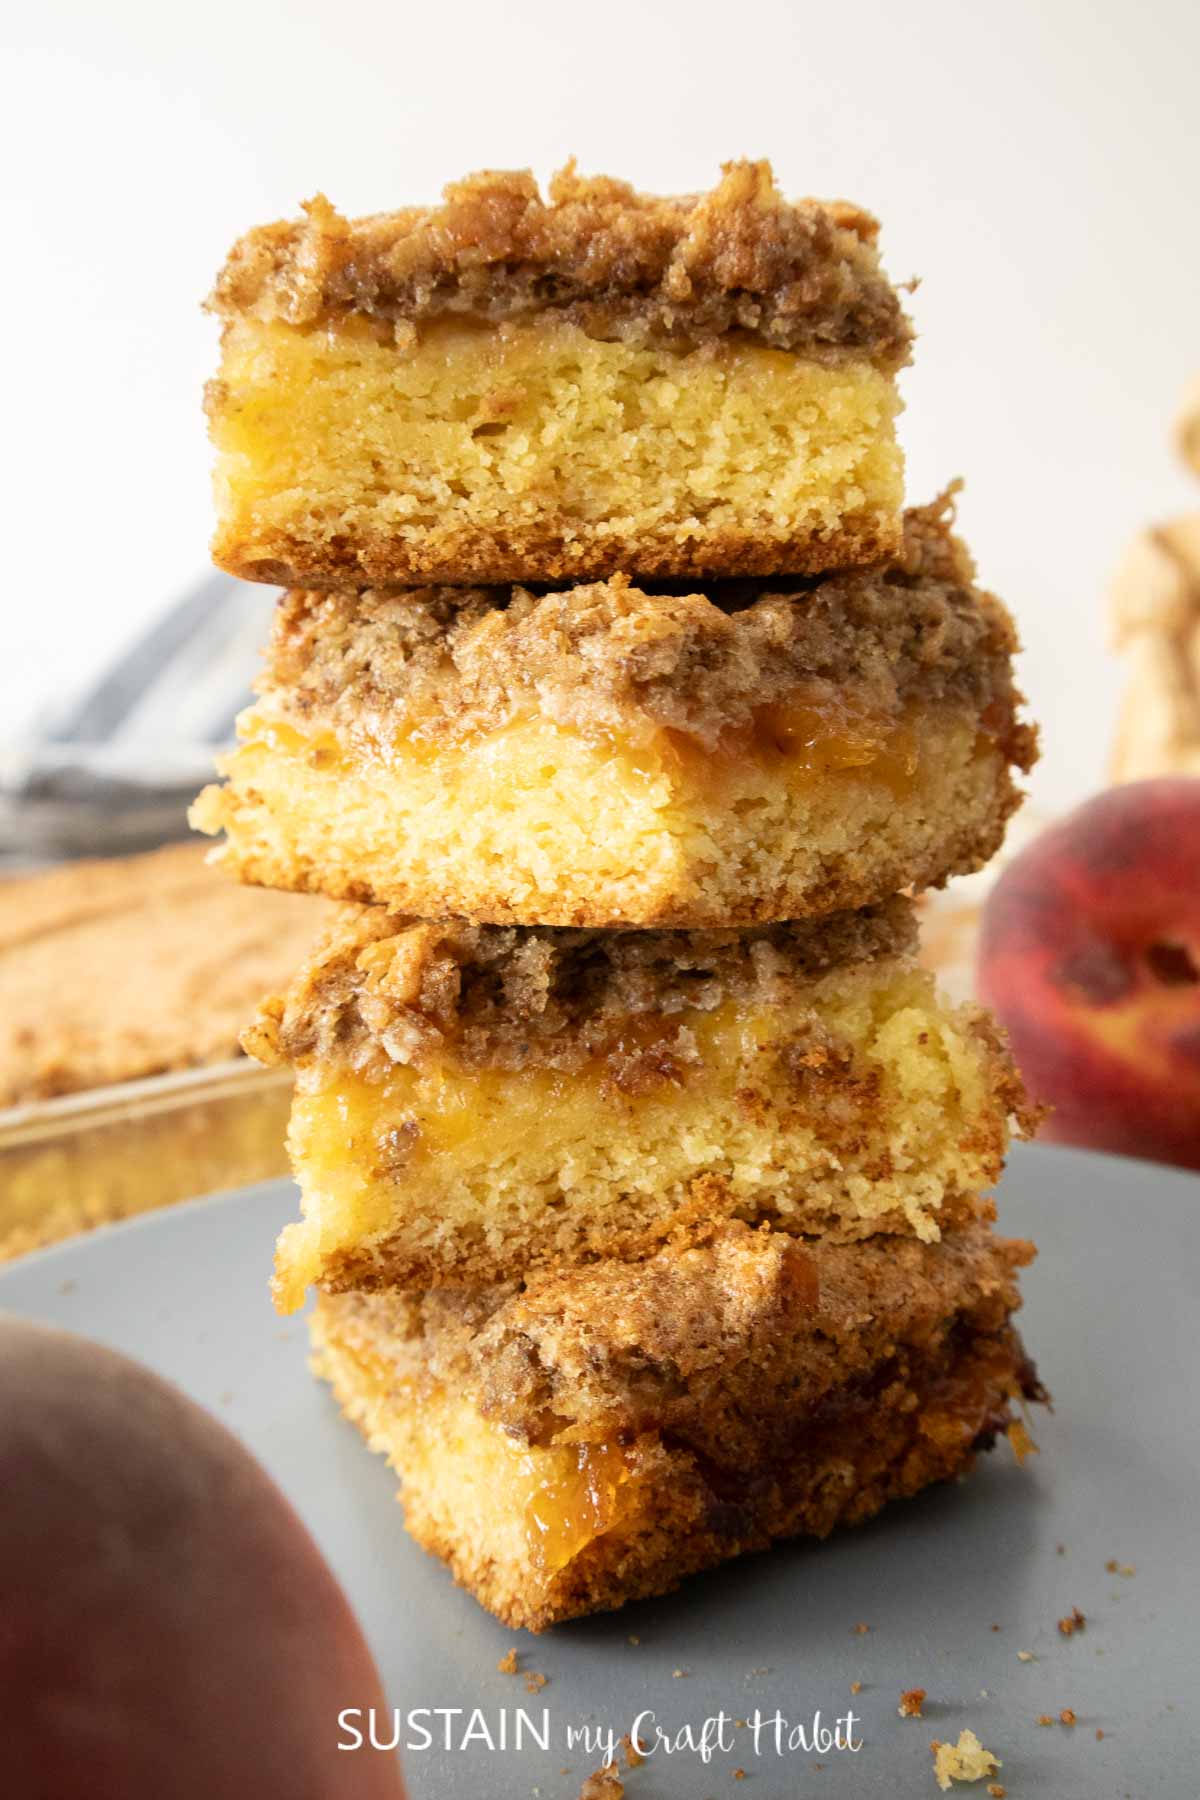 Stacked walnut and peach jam dessert squares.